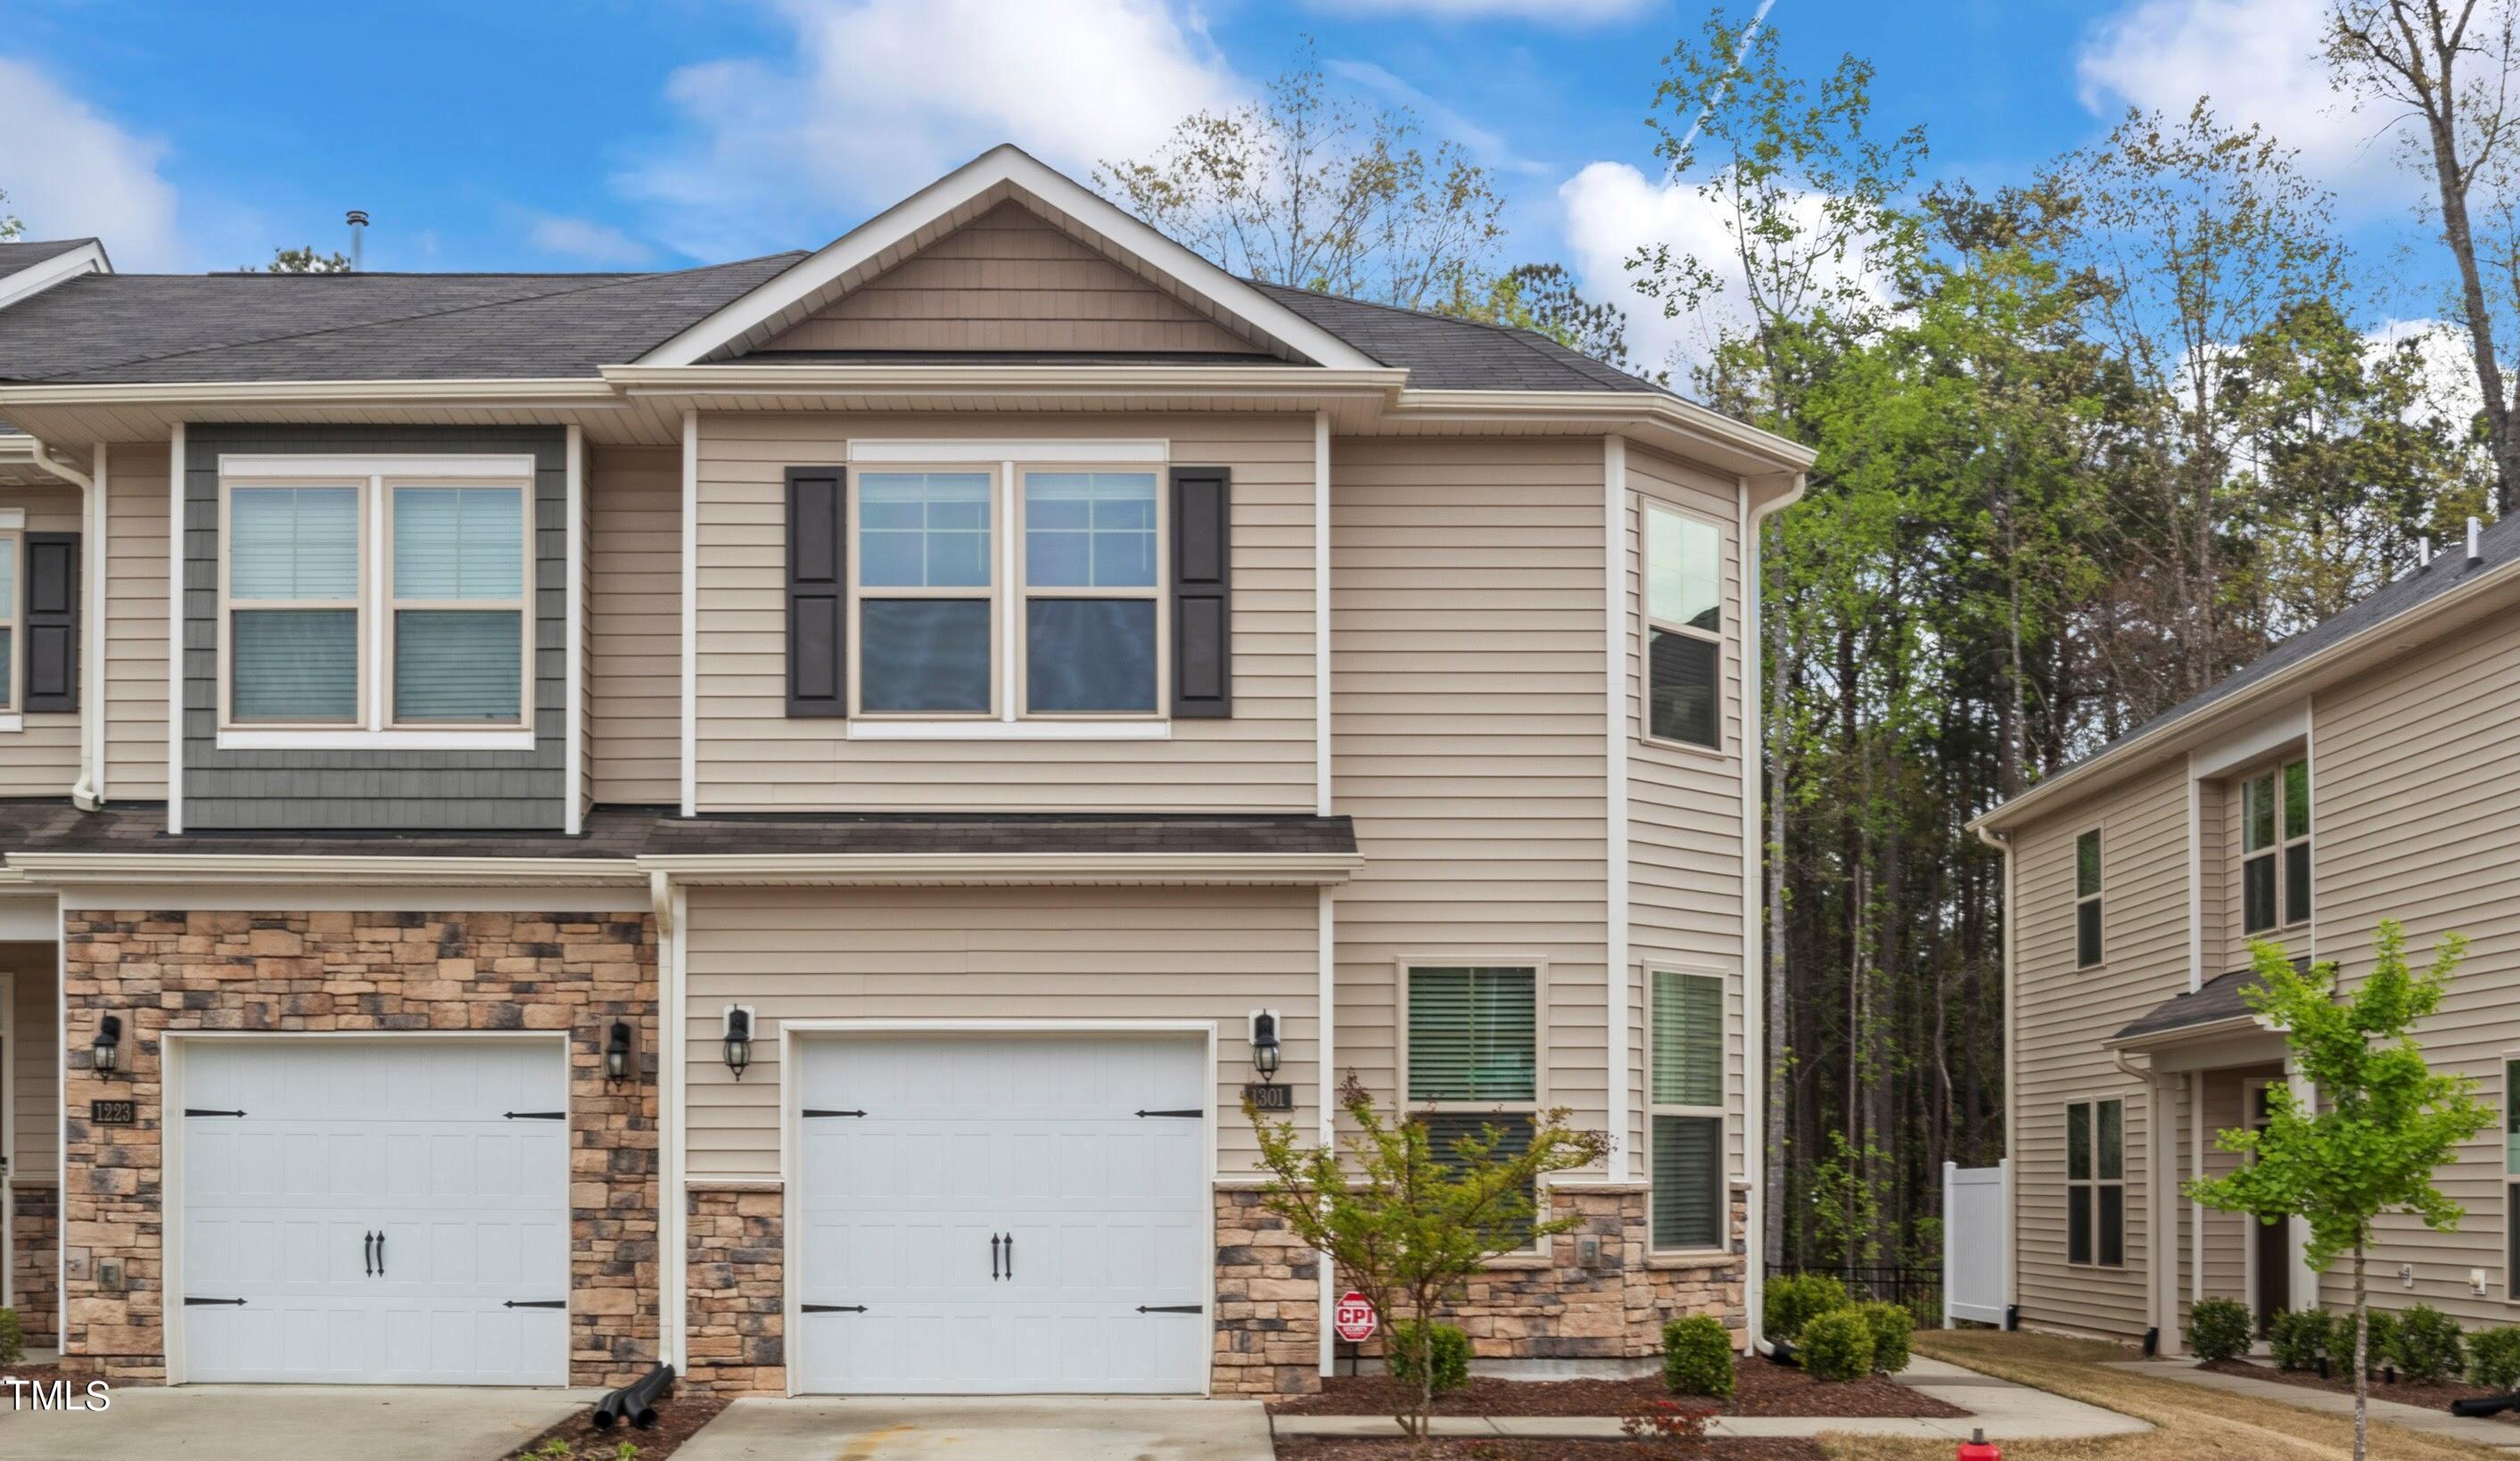 Photo one of 1301 Compass Dr Durham NC 27713 | MLS 10022372